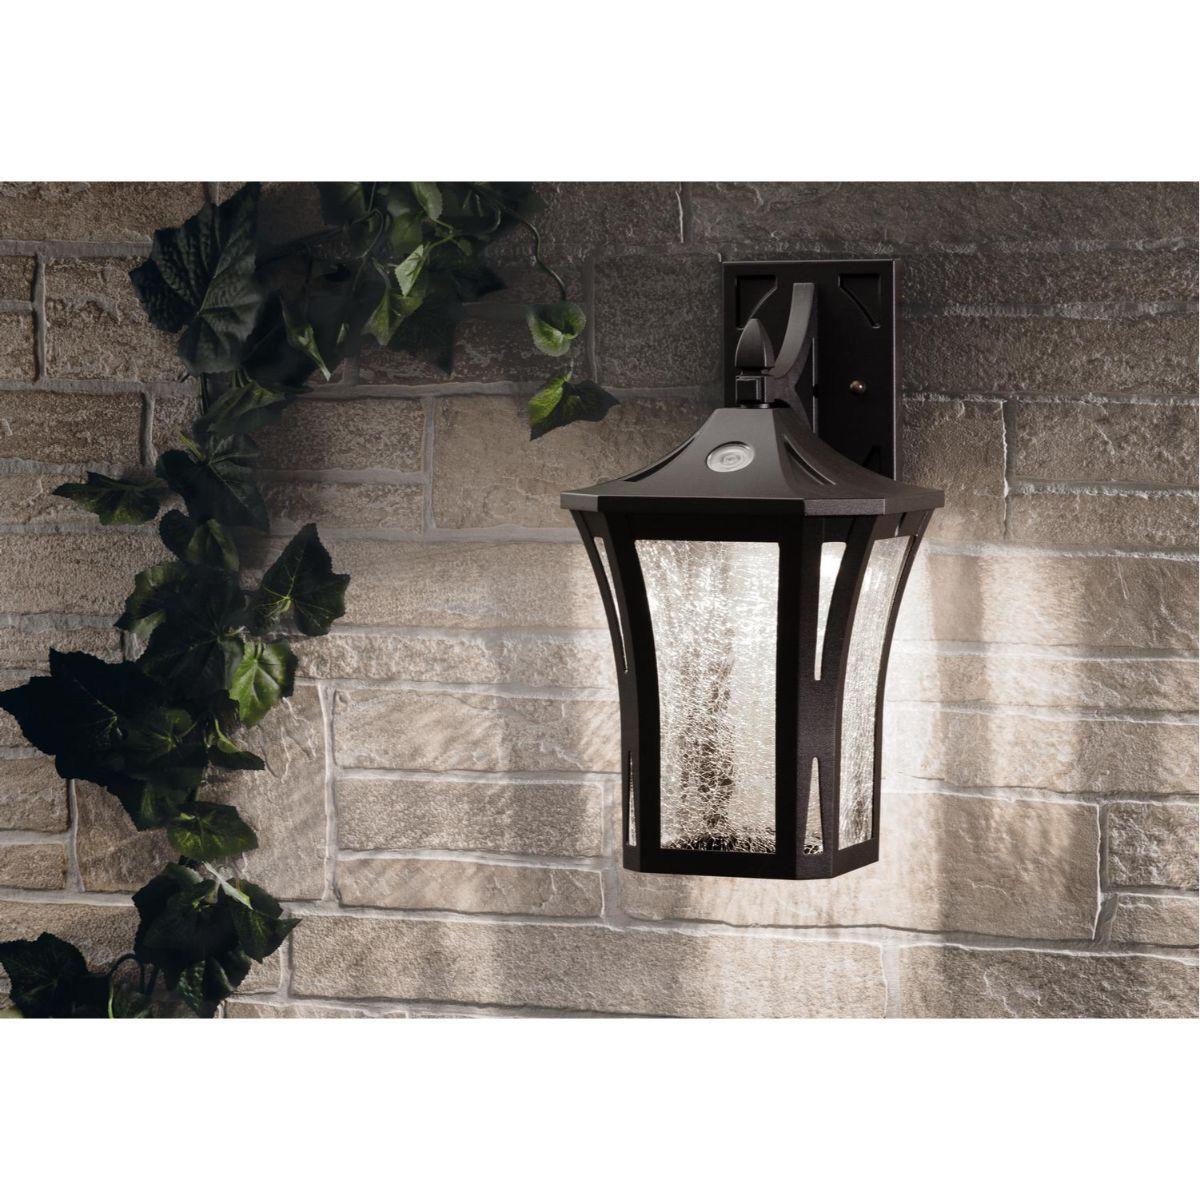 Stratford 15 in. LED Outdoor Wall Light Black Finish